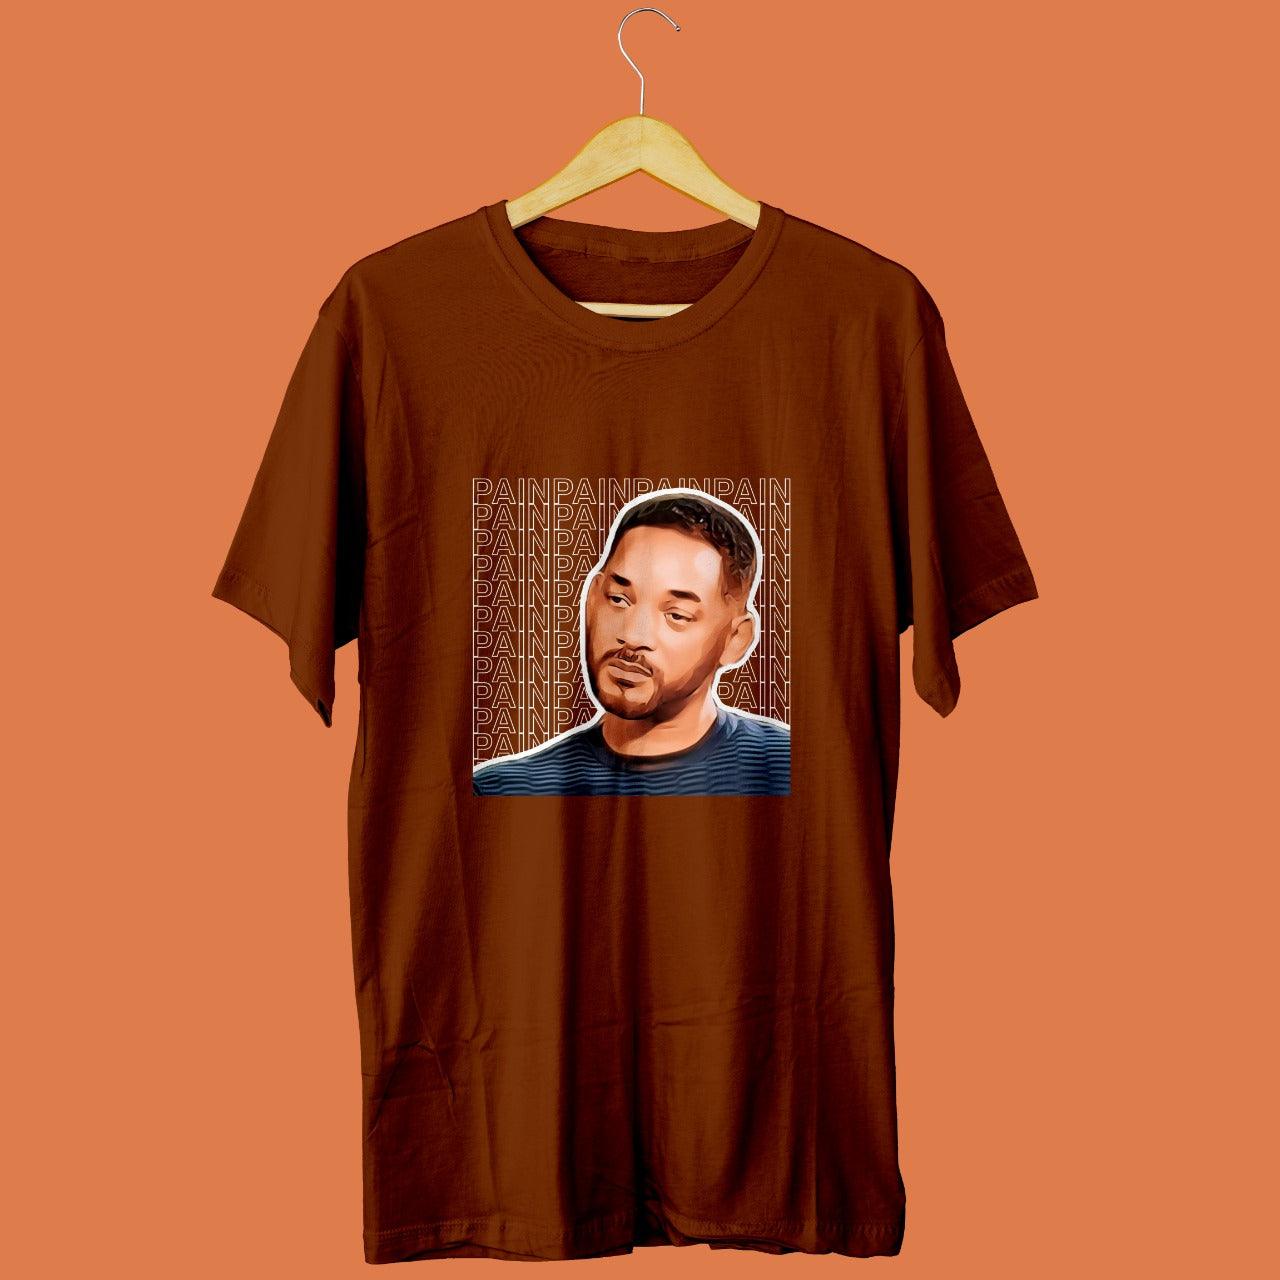 brown tshirt with picture of sad will smith printed on it with pain written multiple times in the background, relatable memes